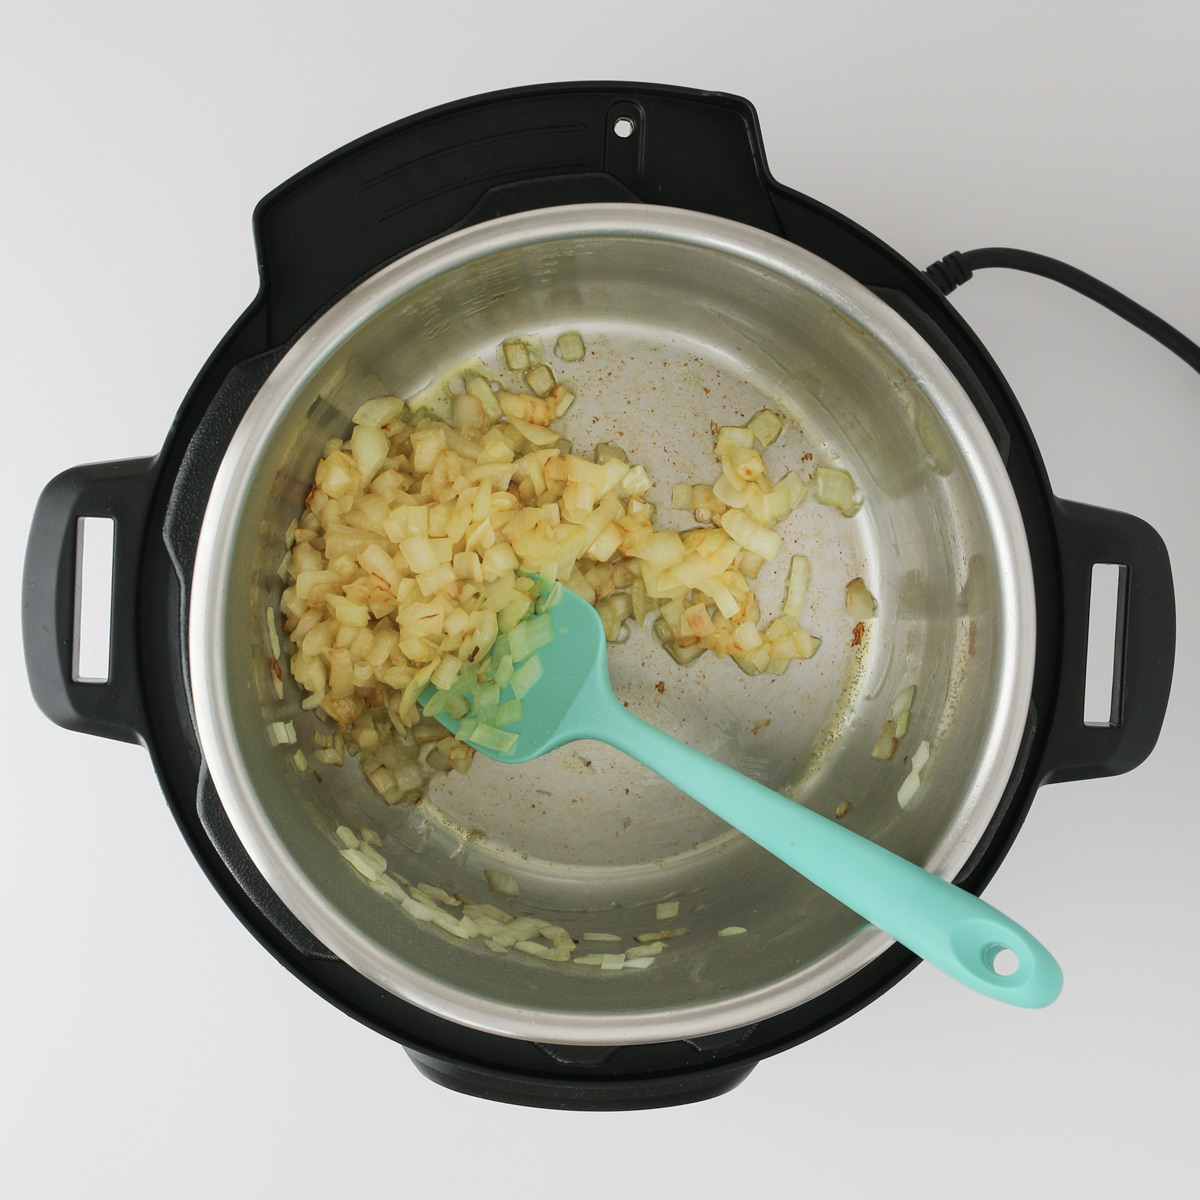 onions sauteed in pressure cooker insert with teal spatula.